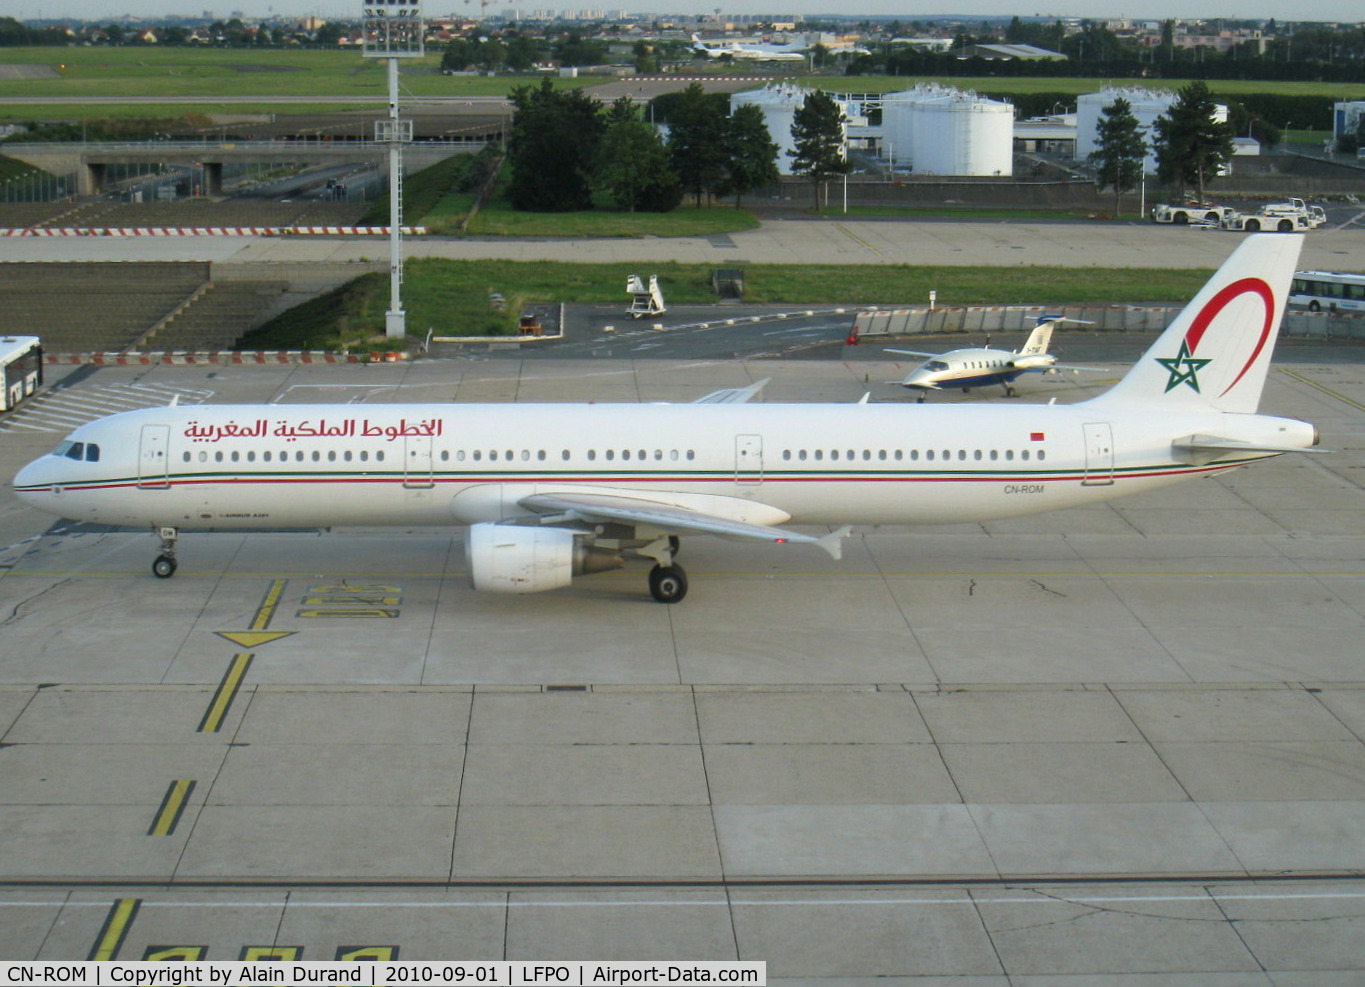 CN-ROM, 2007 Airbus A321-211 C/N 3070, Out of 51 active fleet members, 45 are Boeings, two are ATRs and four are A321s